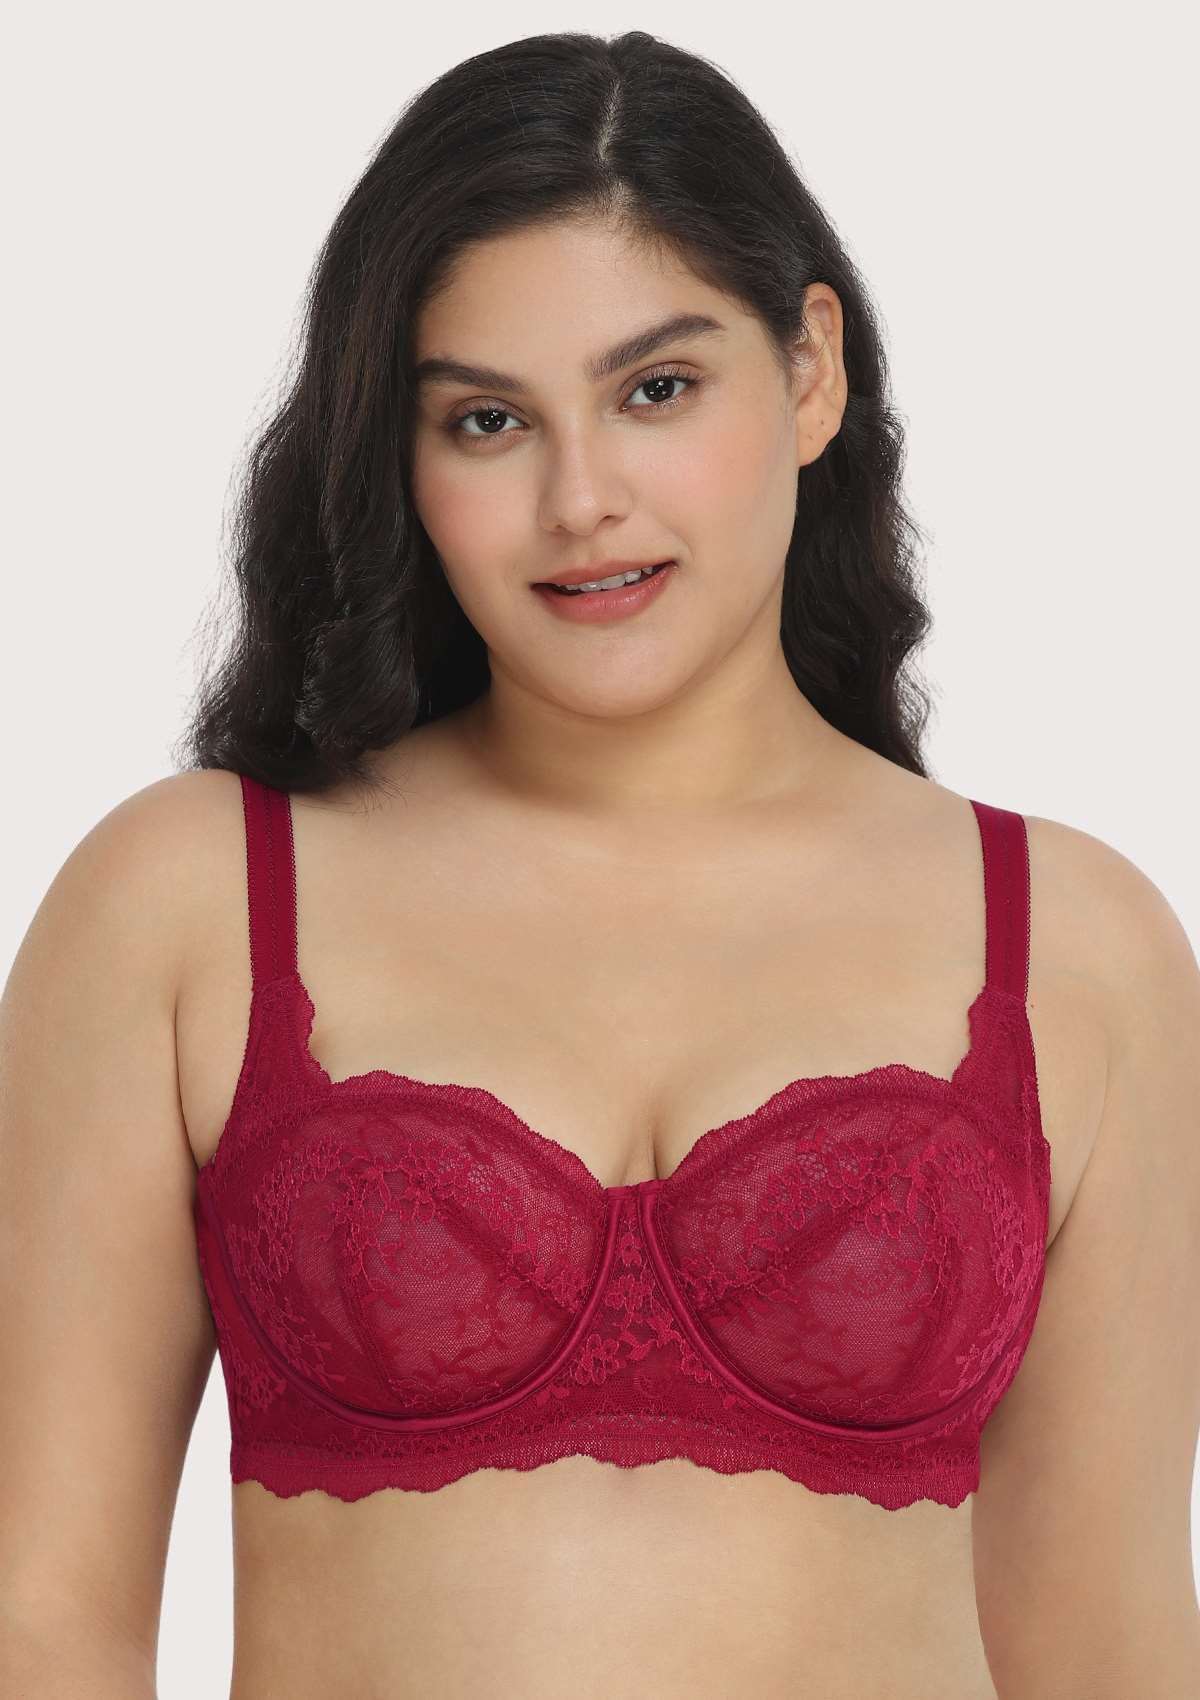 HSIA Floral Lace Unlined Bridal Balconette Bra Set - Supportive Classic - Burgundy / 40 / D